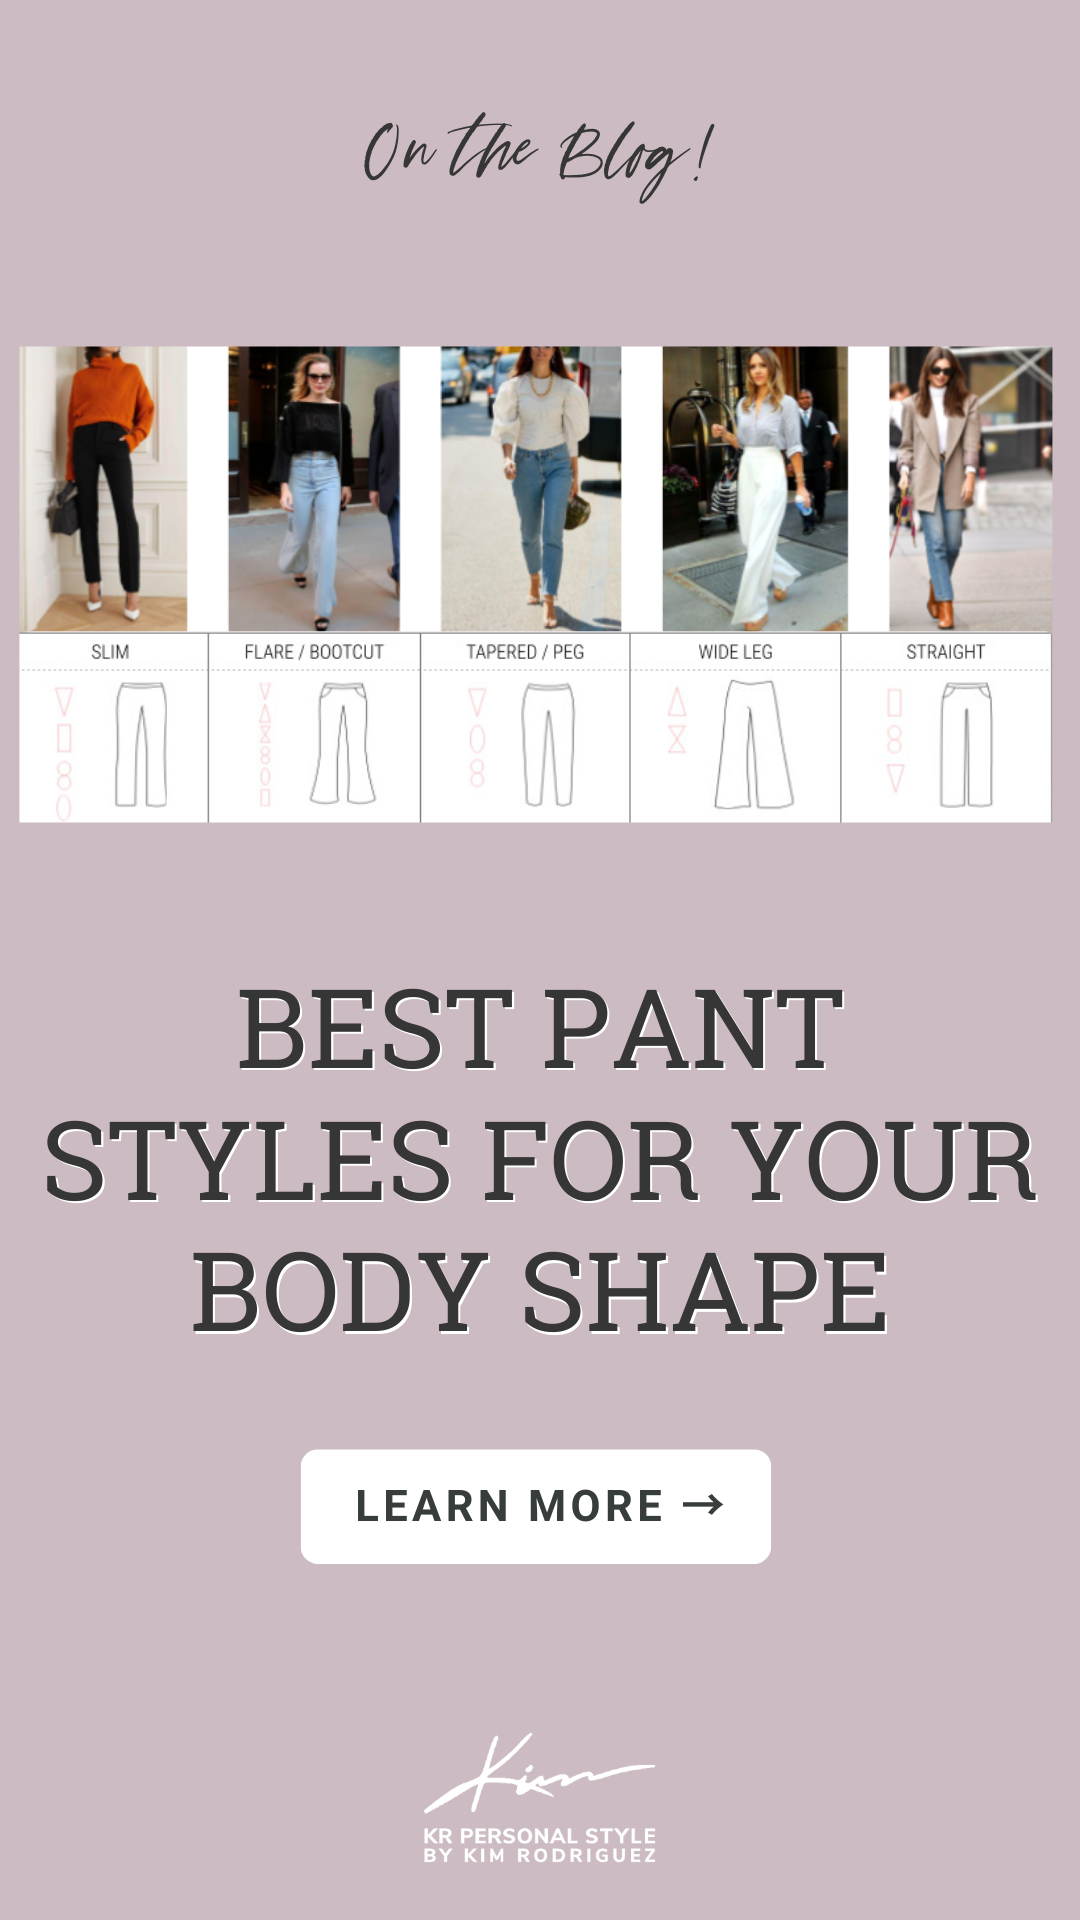 Best Pant Styles for Your Body Shape - KR Personal Style